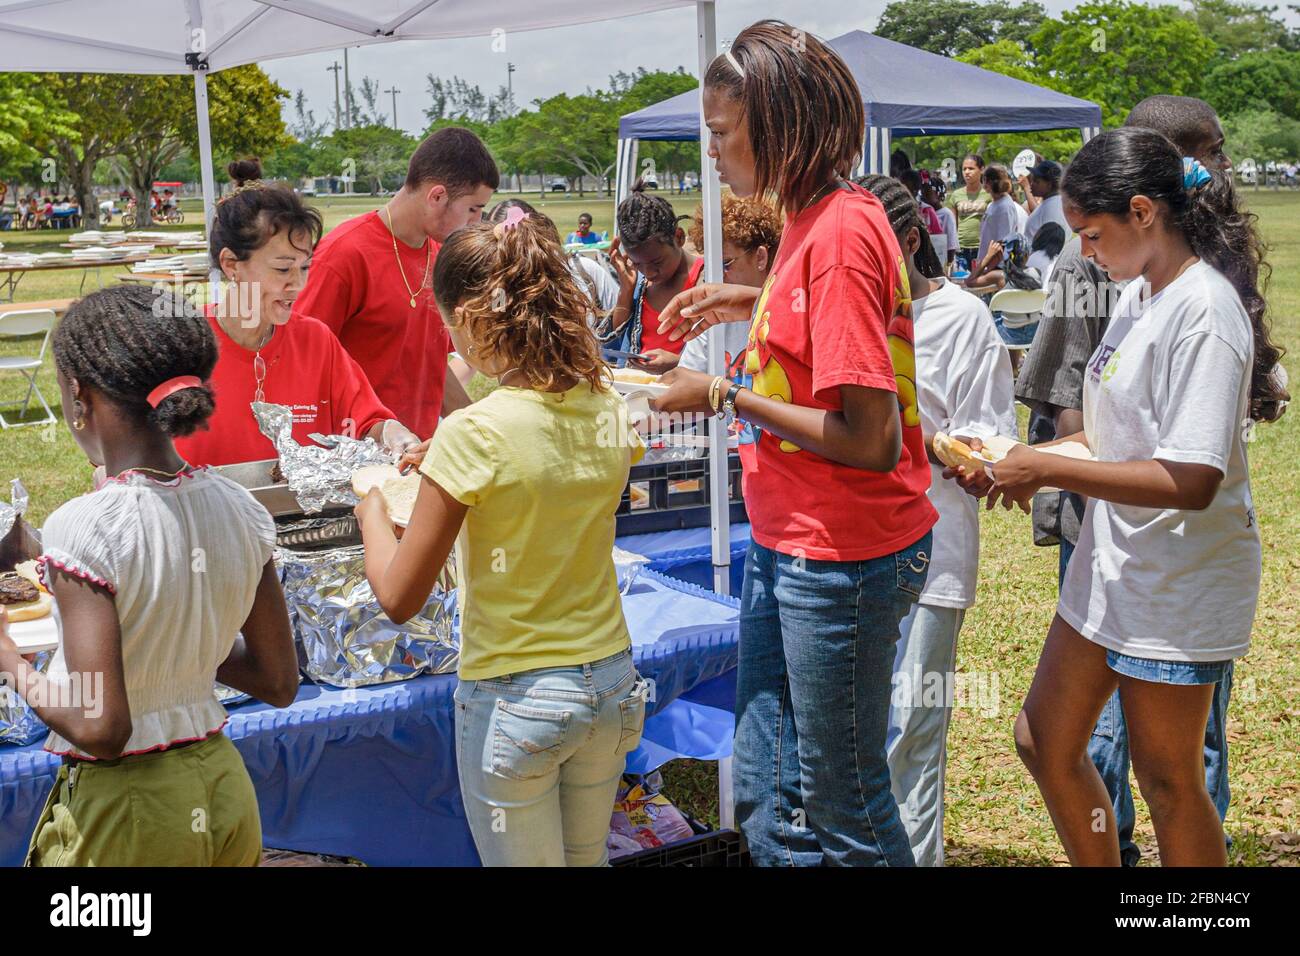 Miami Florida,Tropical Park Droga Free Youth in Town DFYIT,teen Student anti addiction group picnic,buffet style line table food Black Ispan Boys gi Foto Stock